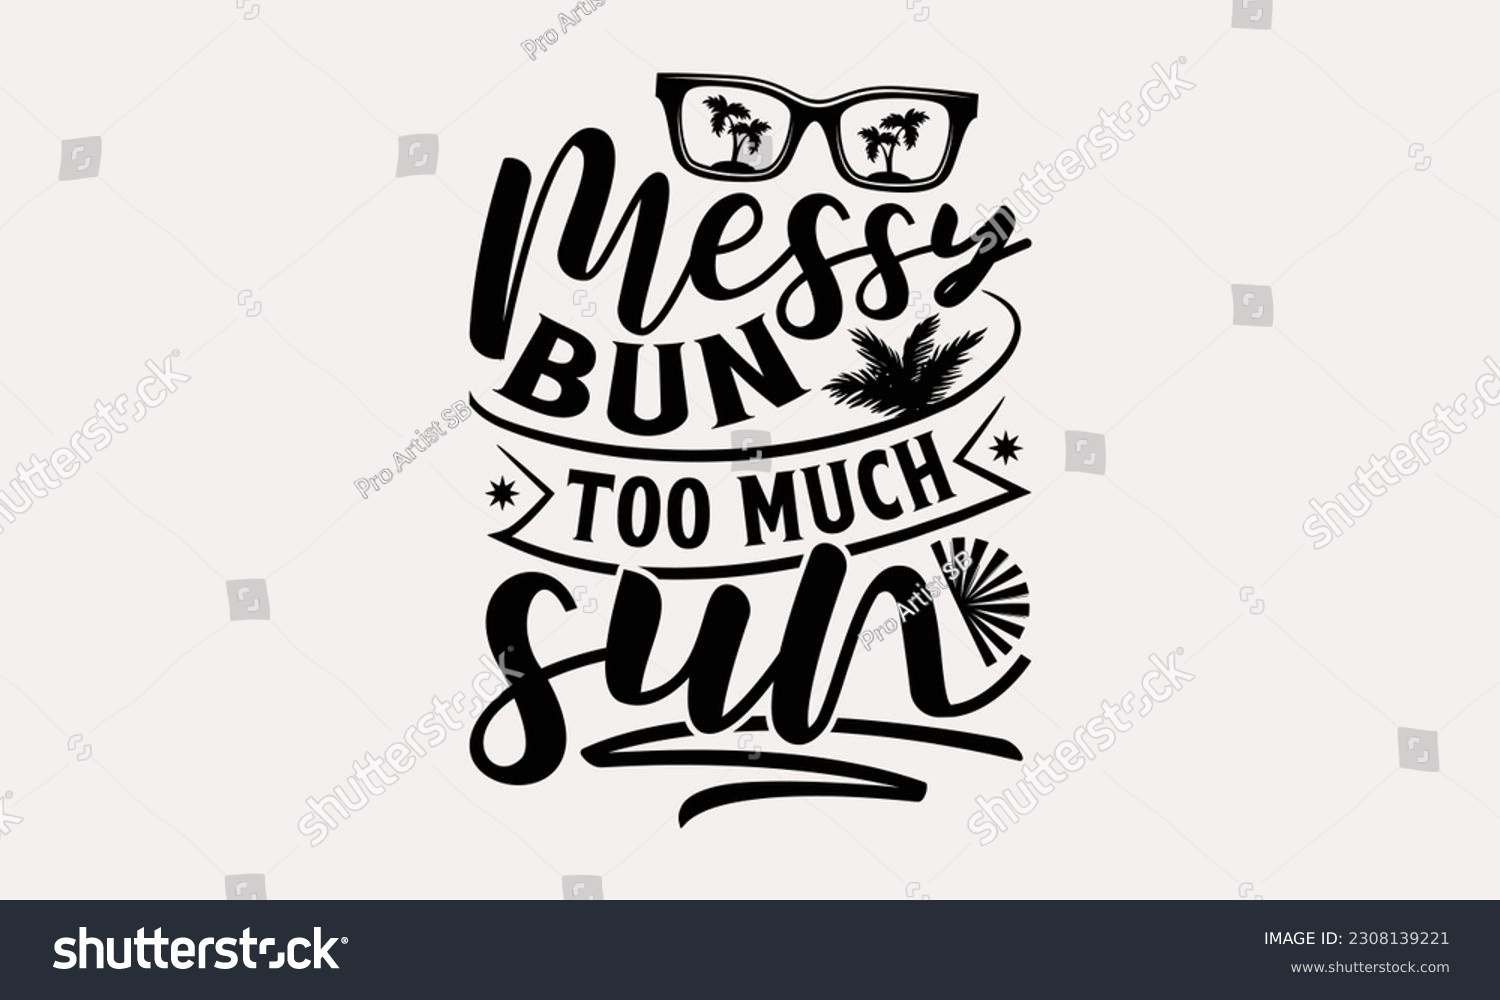 SVG of Messy bun too much sun - Summer T-shirt Design, This illustration can be used as a print on t-shirts and cards, stationary or as a poster. svg